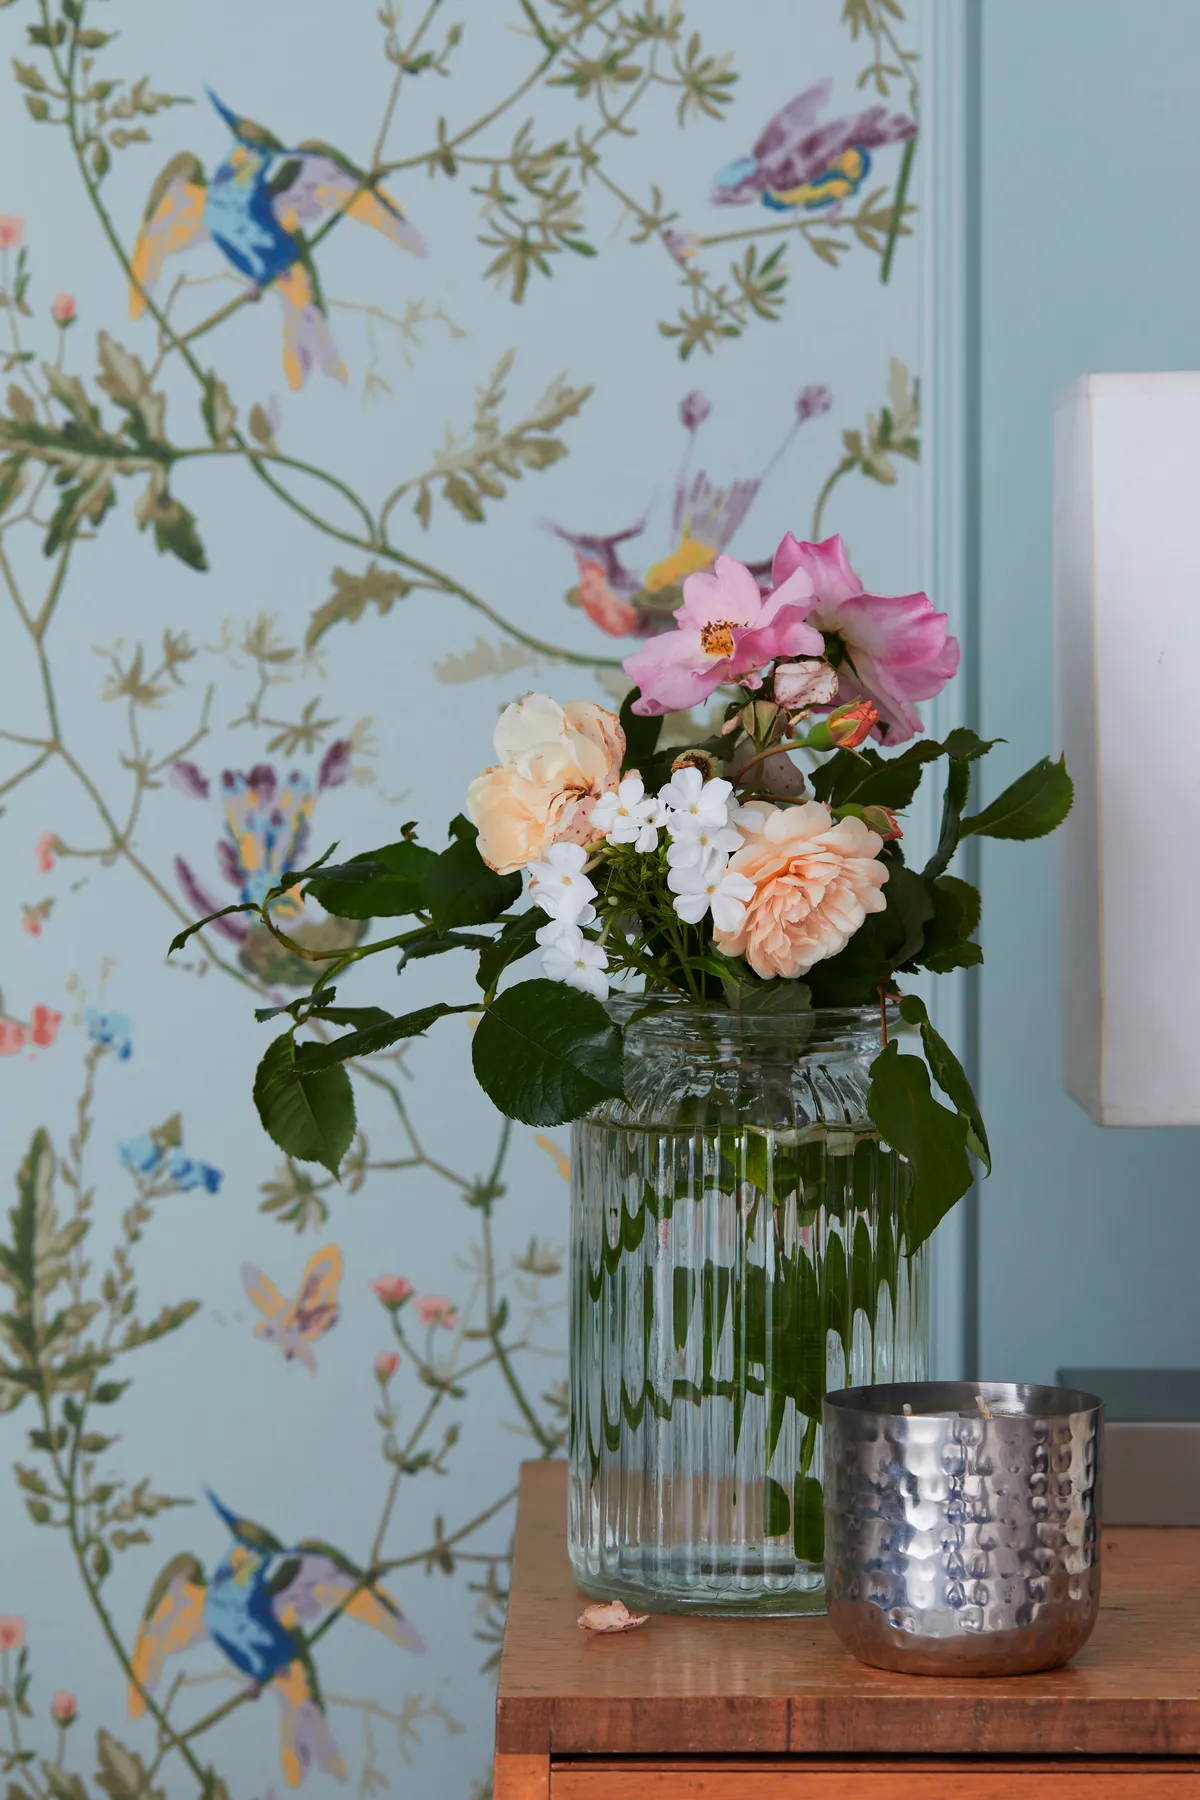 Good idea! On a tight budget? You can still have pricey wallpaper – use it in panels rather than over a full wall.